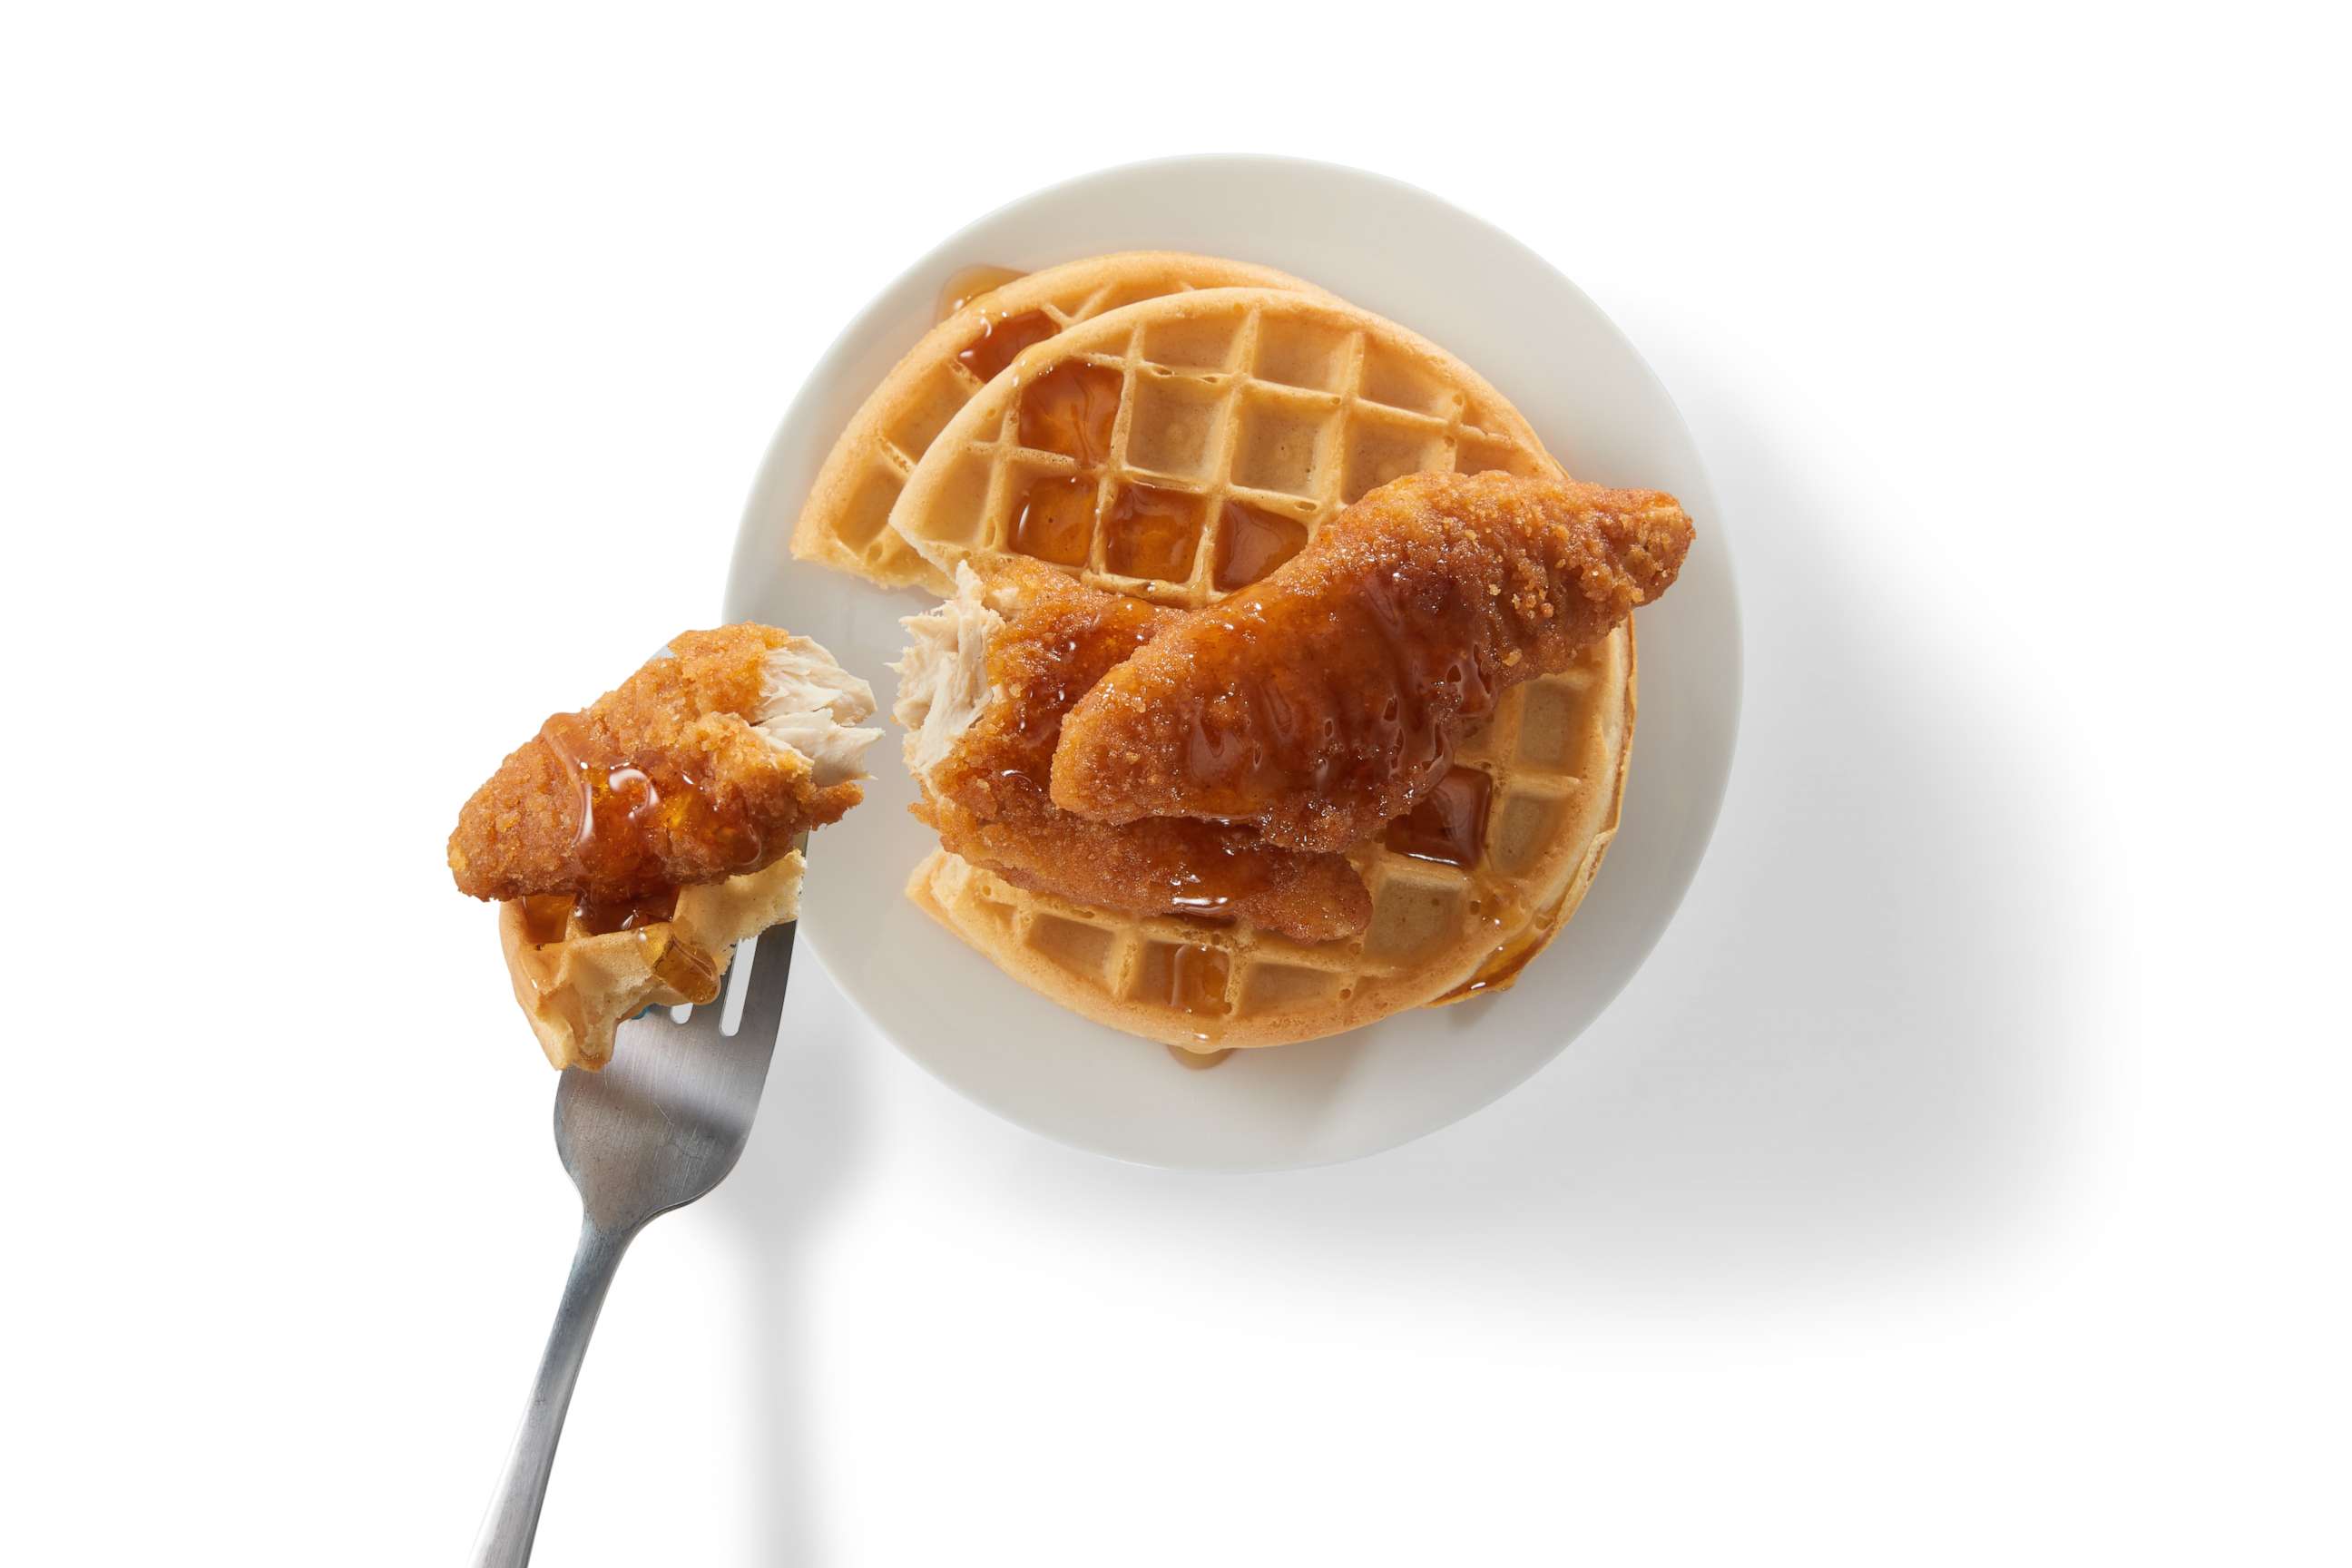 PHOTO: Eggo teamed up with Morning Star Farms for a new meat-free version of the popular dish.